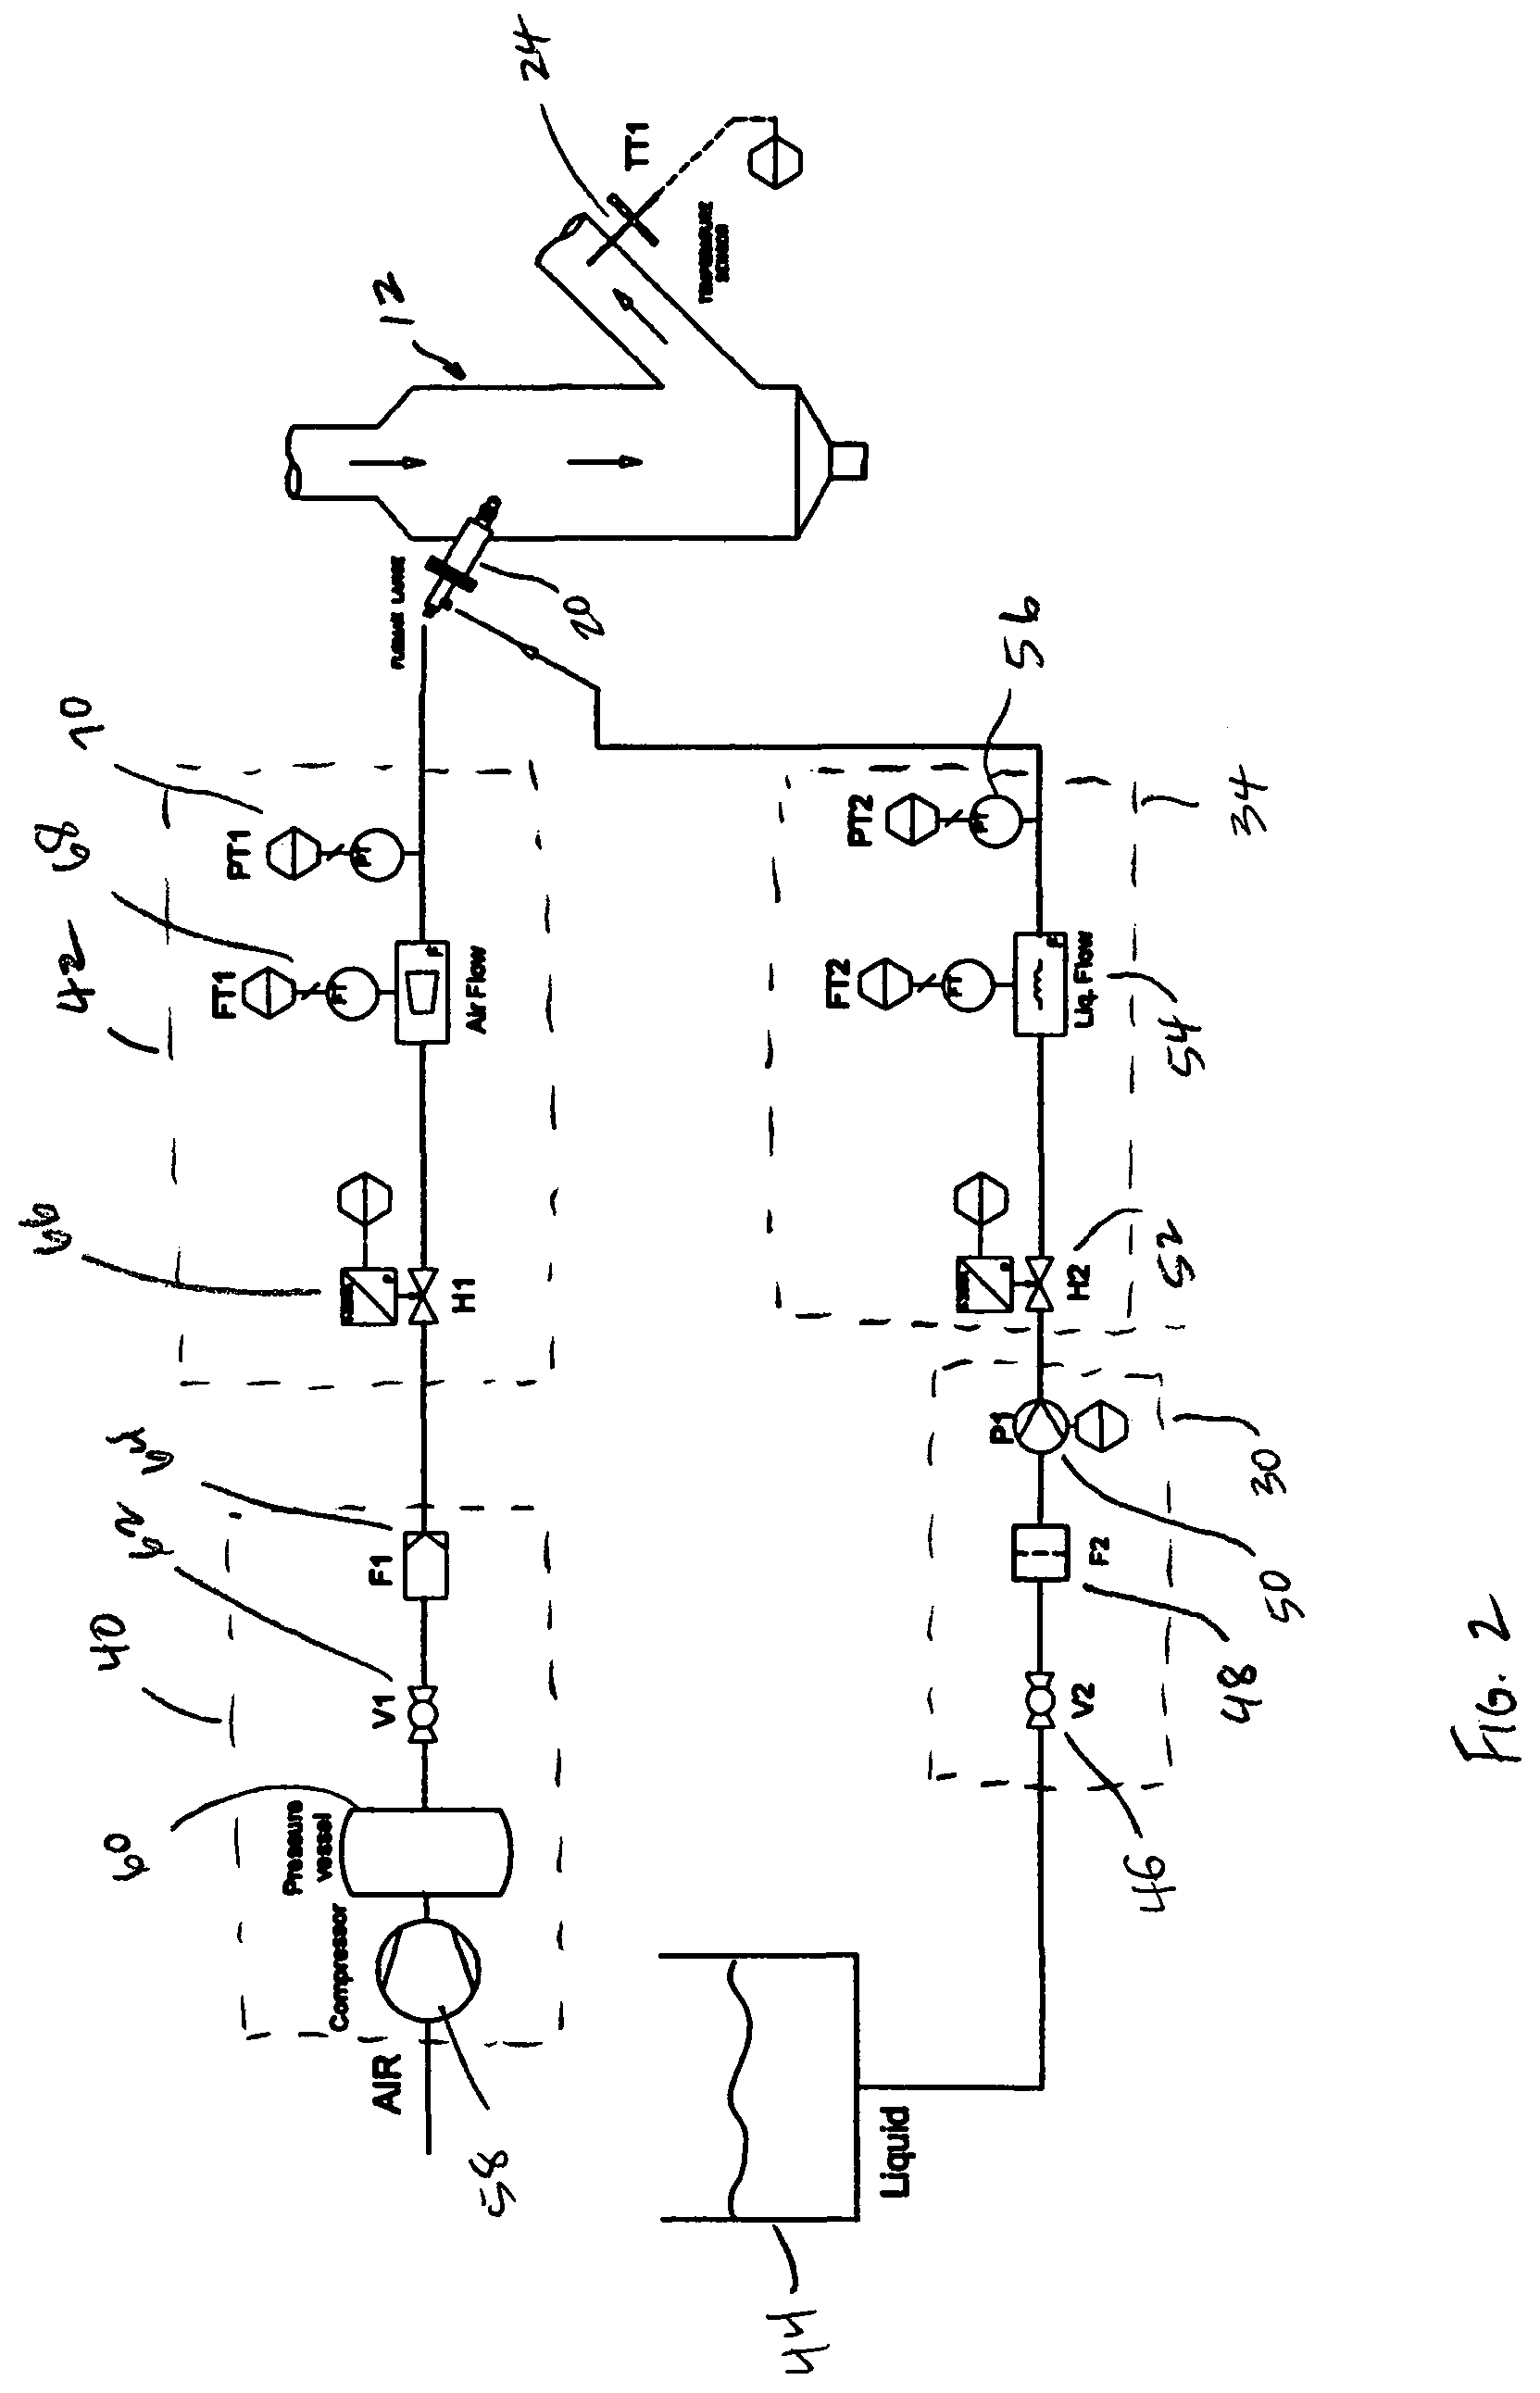 Method and apparatus for reducing air consumption in gas conditioning applications